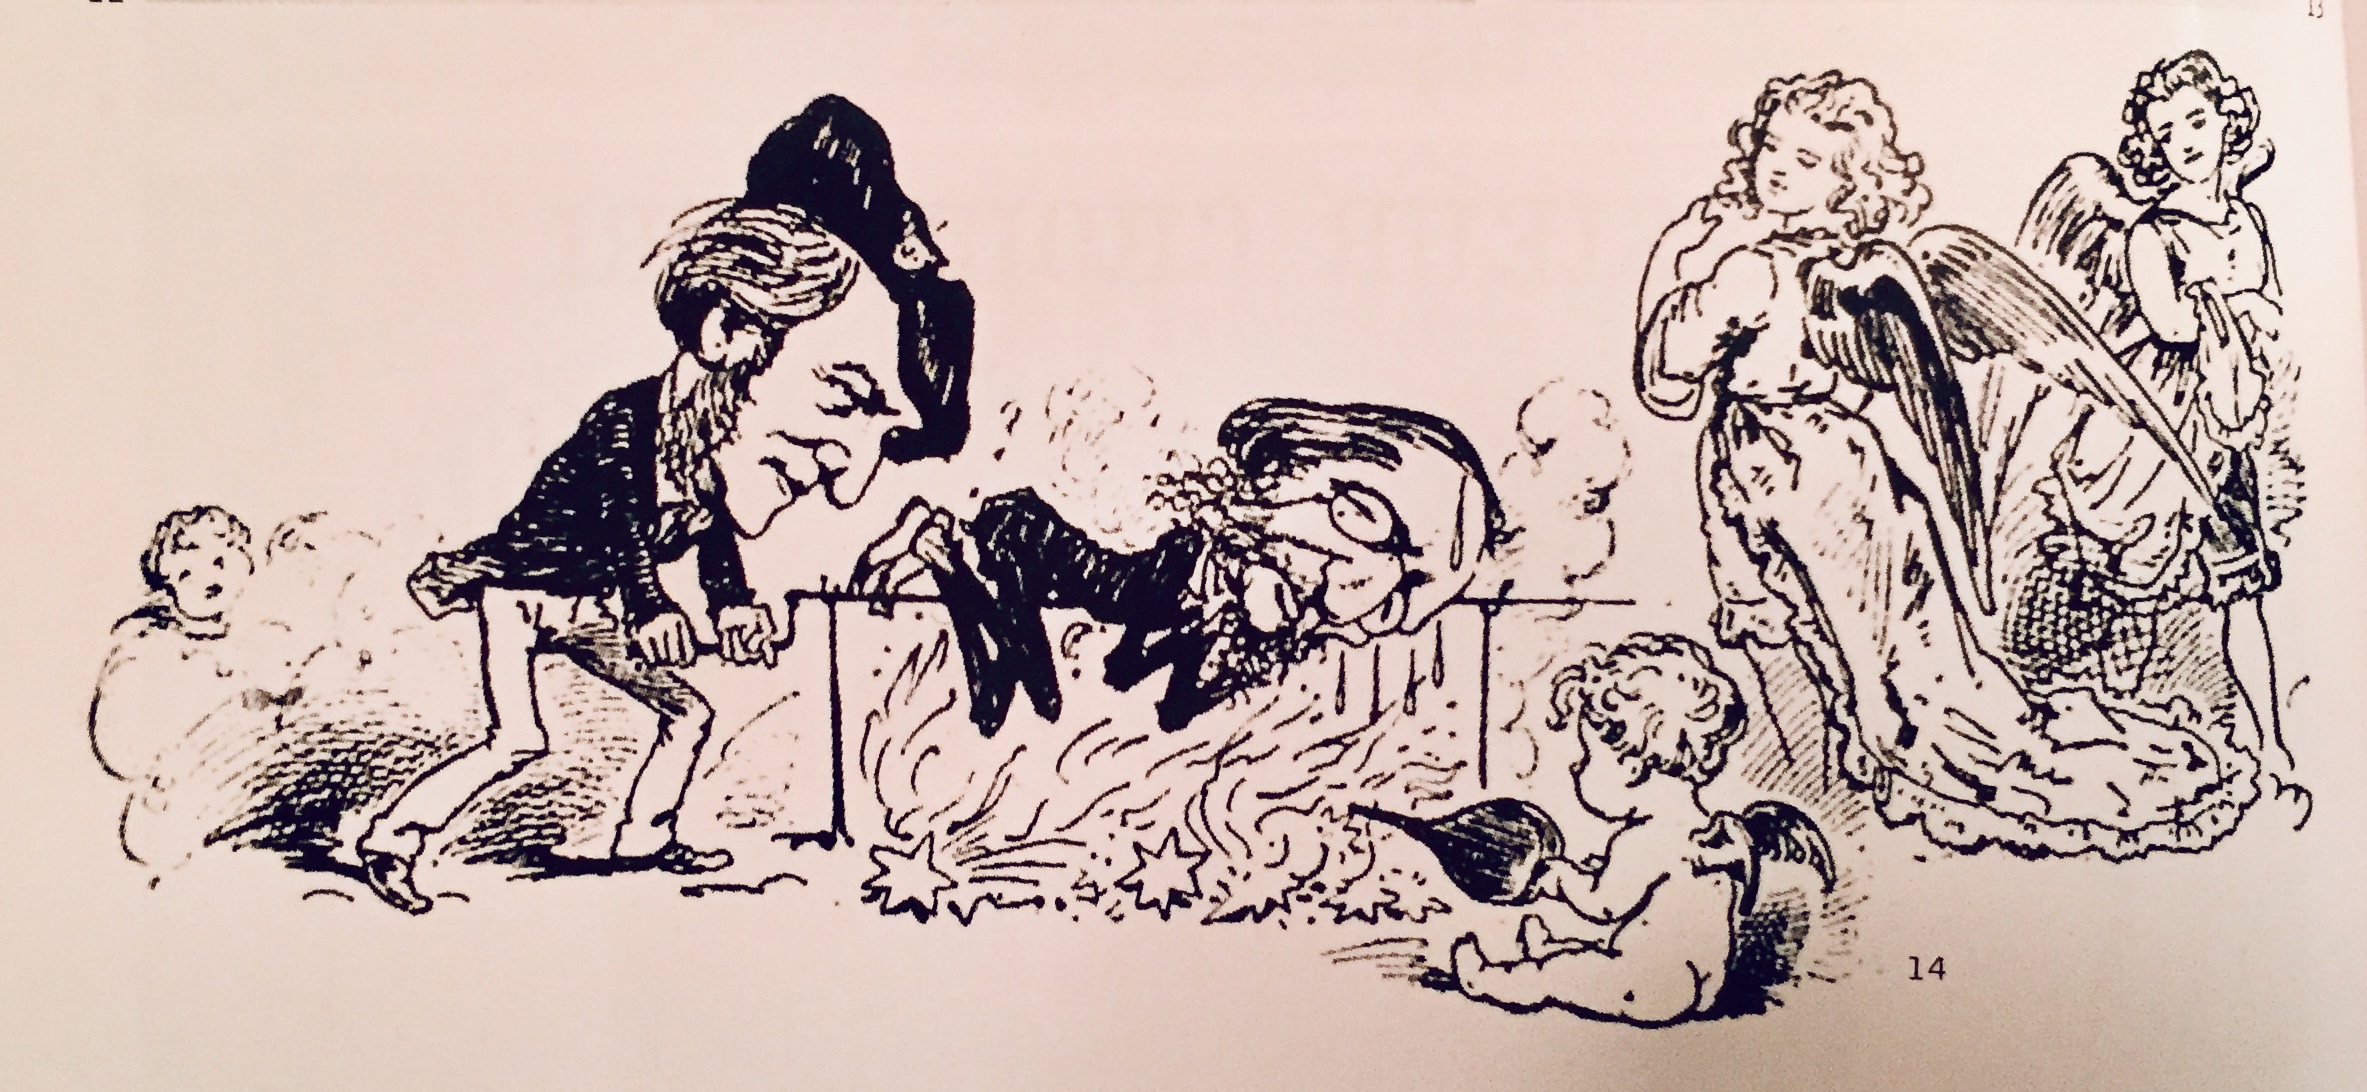 Richard Wagner finishing off his competitor Jacques Offenbach, a charicature from the 1870s, after the Prussian-French war.